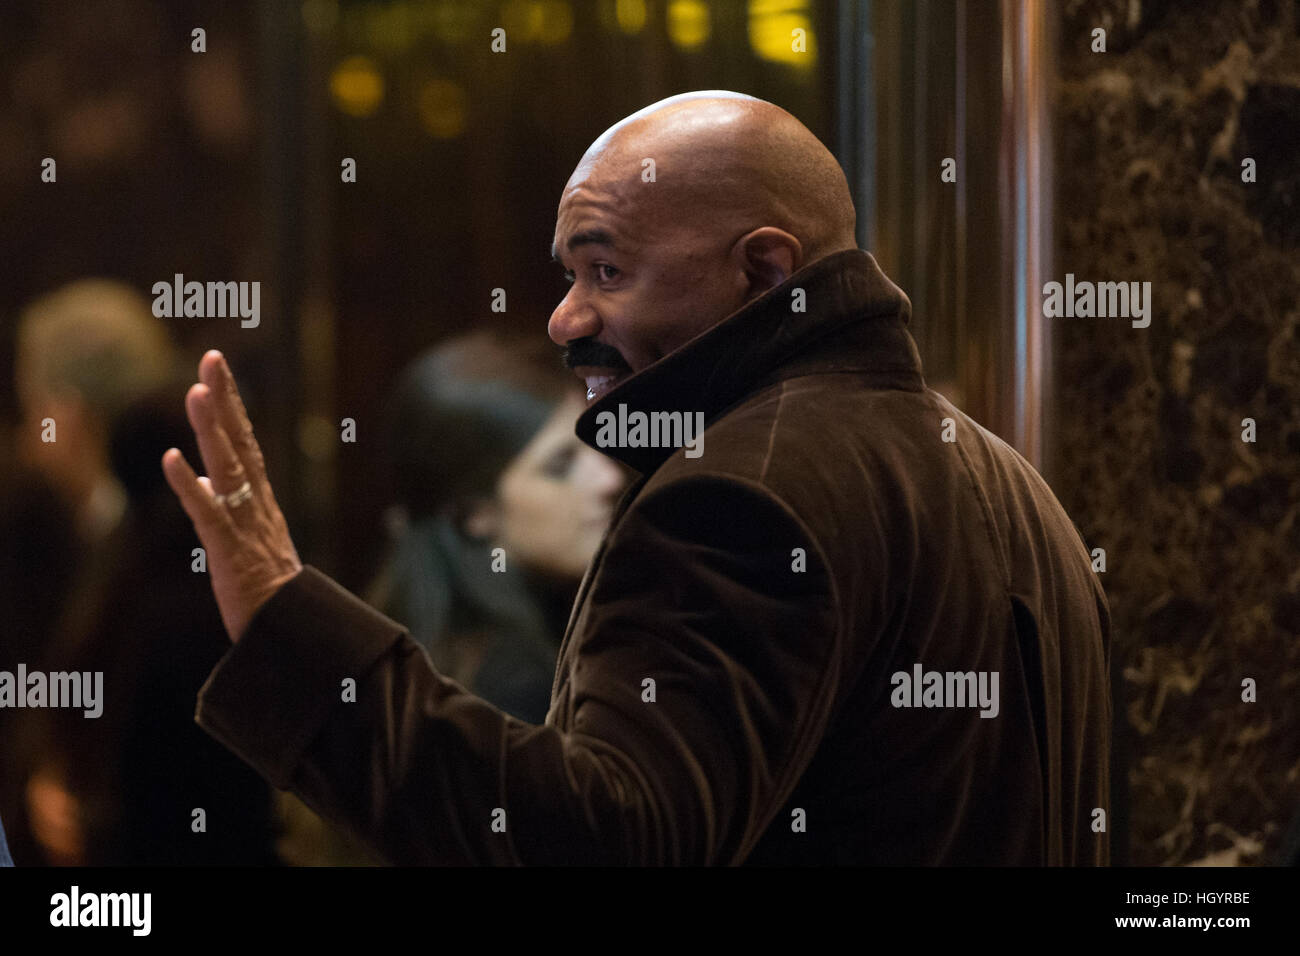 New York, USA. 13th Jan, 2017. Media host Steve Harvey arrives for a meeting with President-elect Donald Trump at Trump Tower in New York, USA. Credit: MediaPunch Inc/Alamy Live News Stock Photo